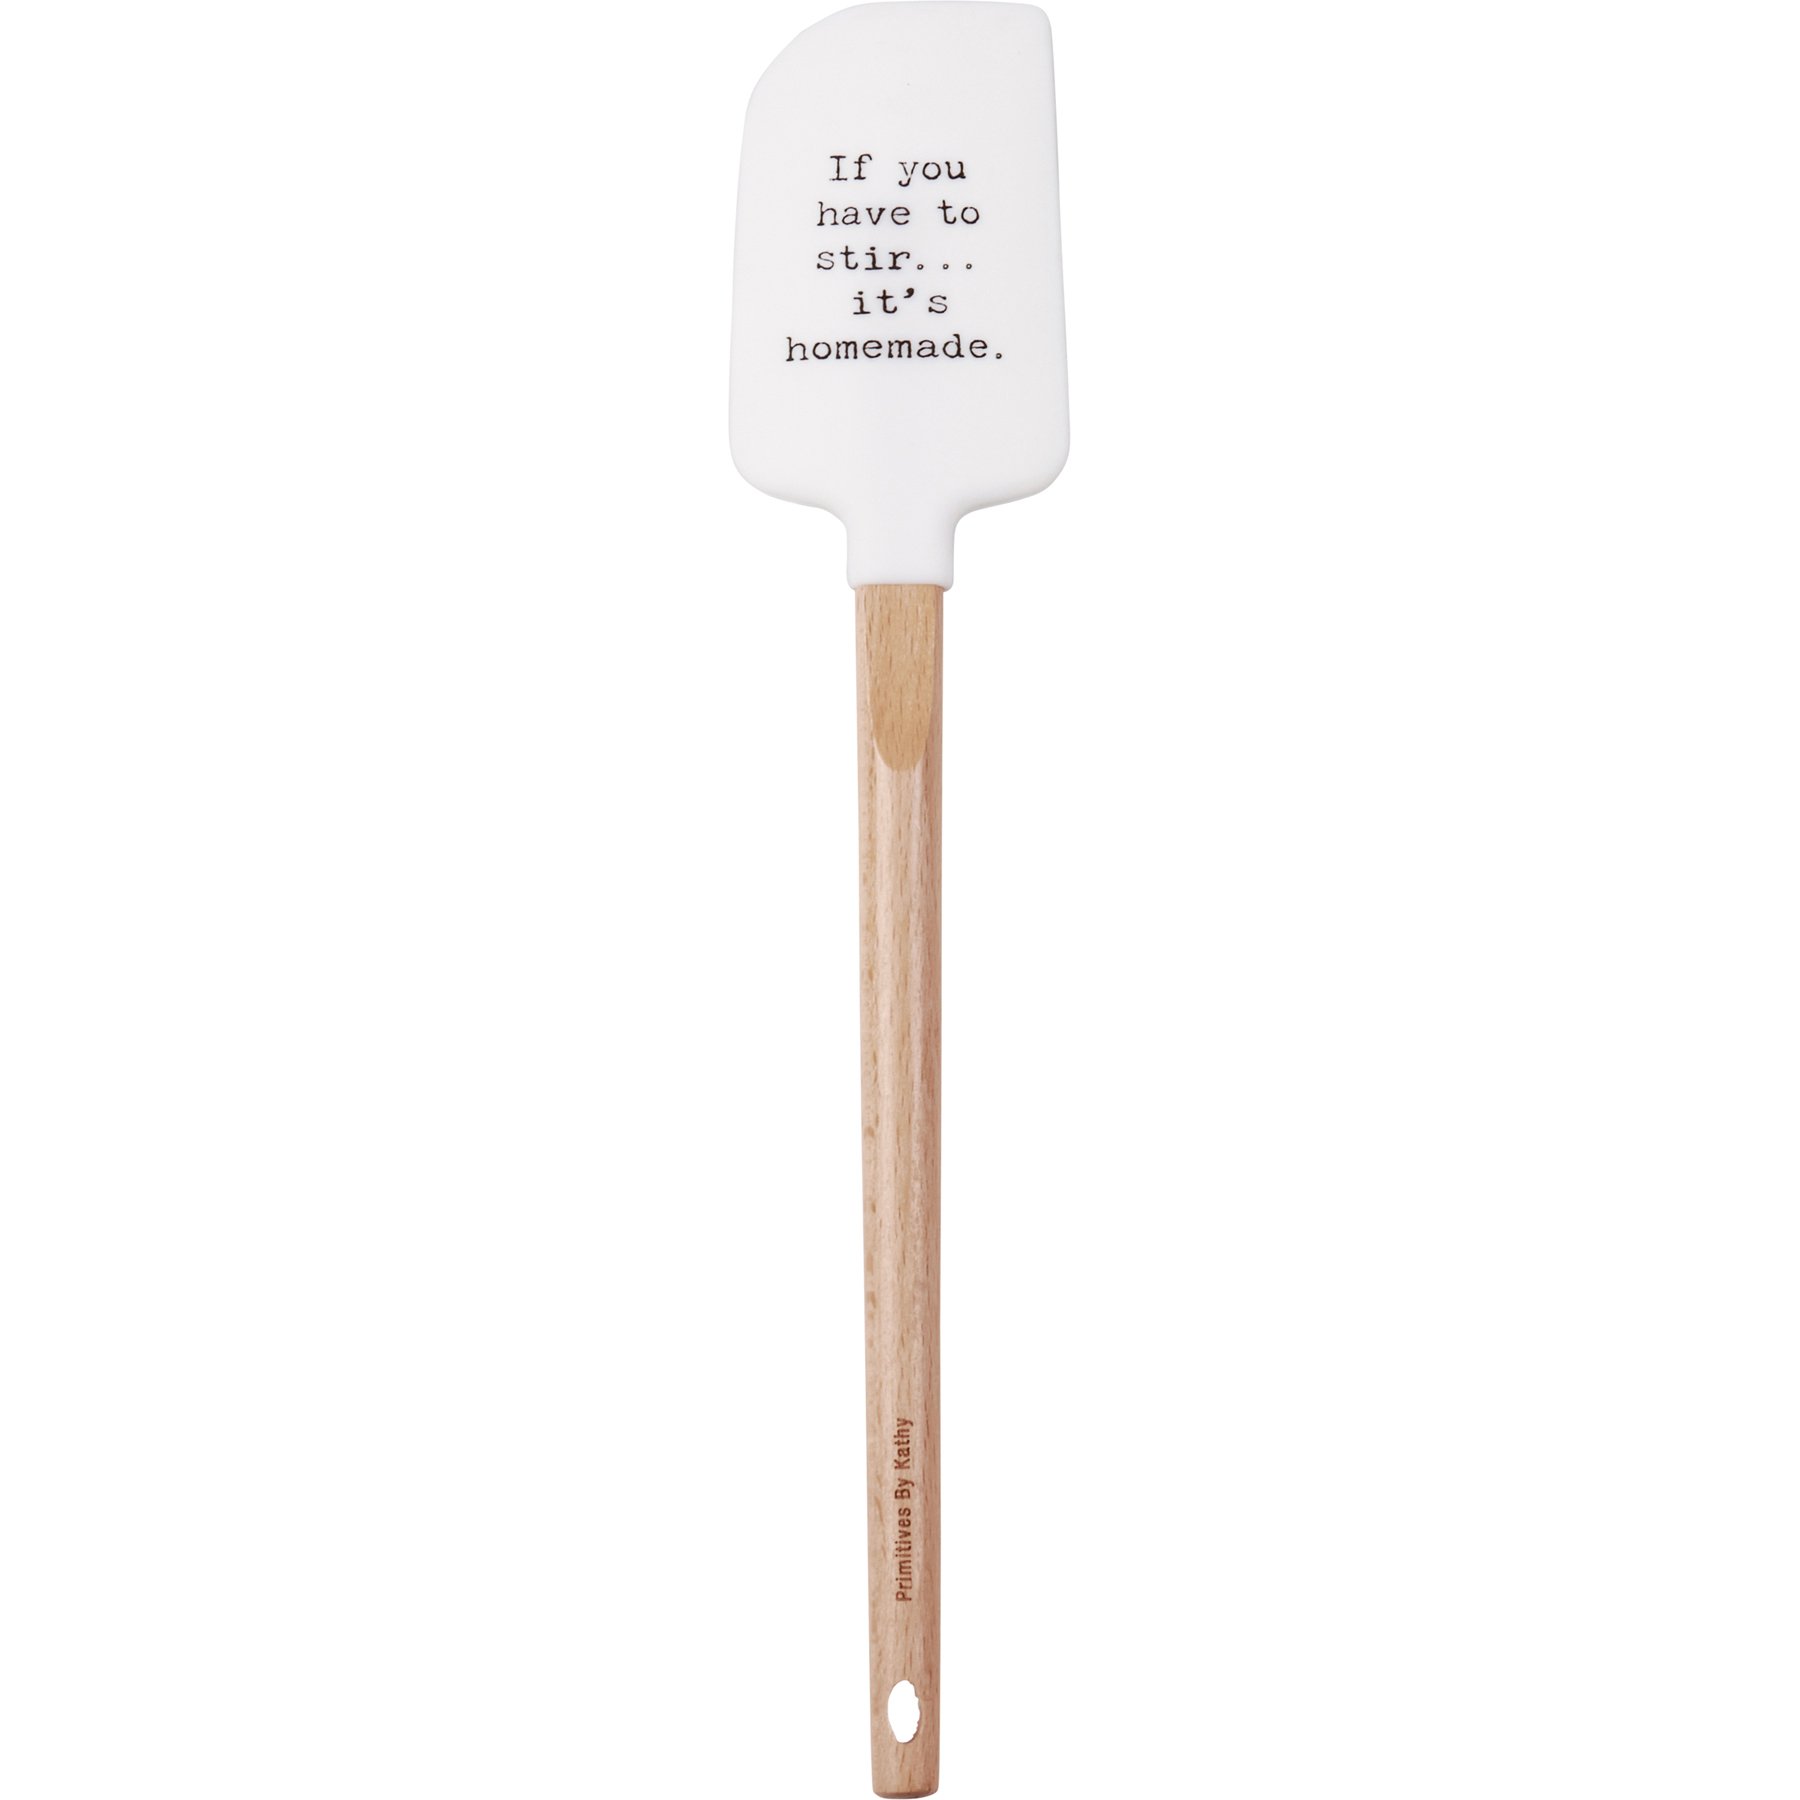 Carrie at Steps2Nutrition - Have you ever noticed that the spatula